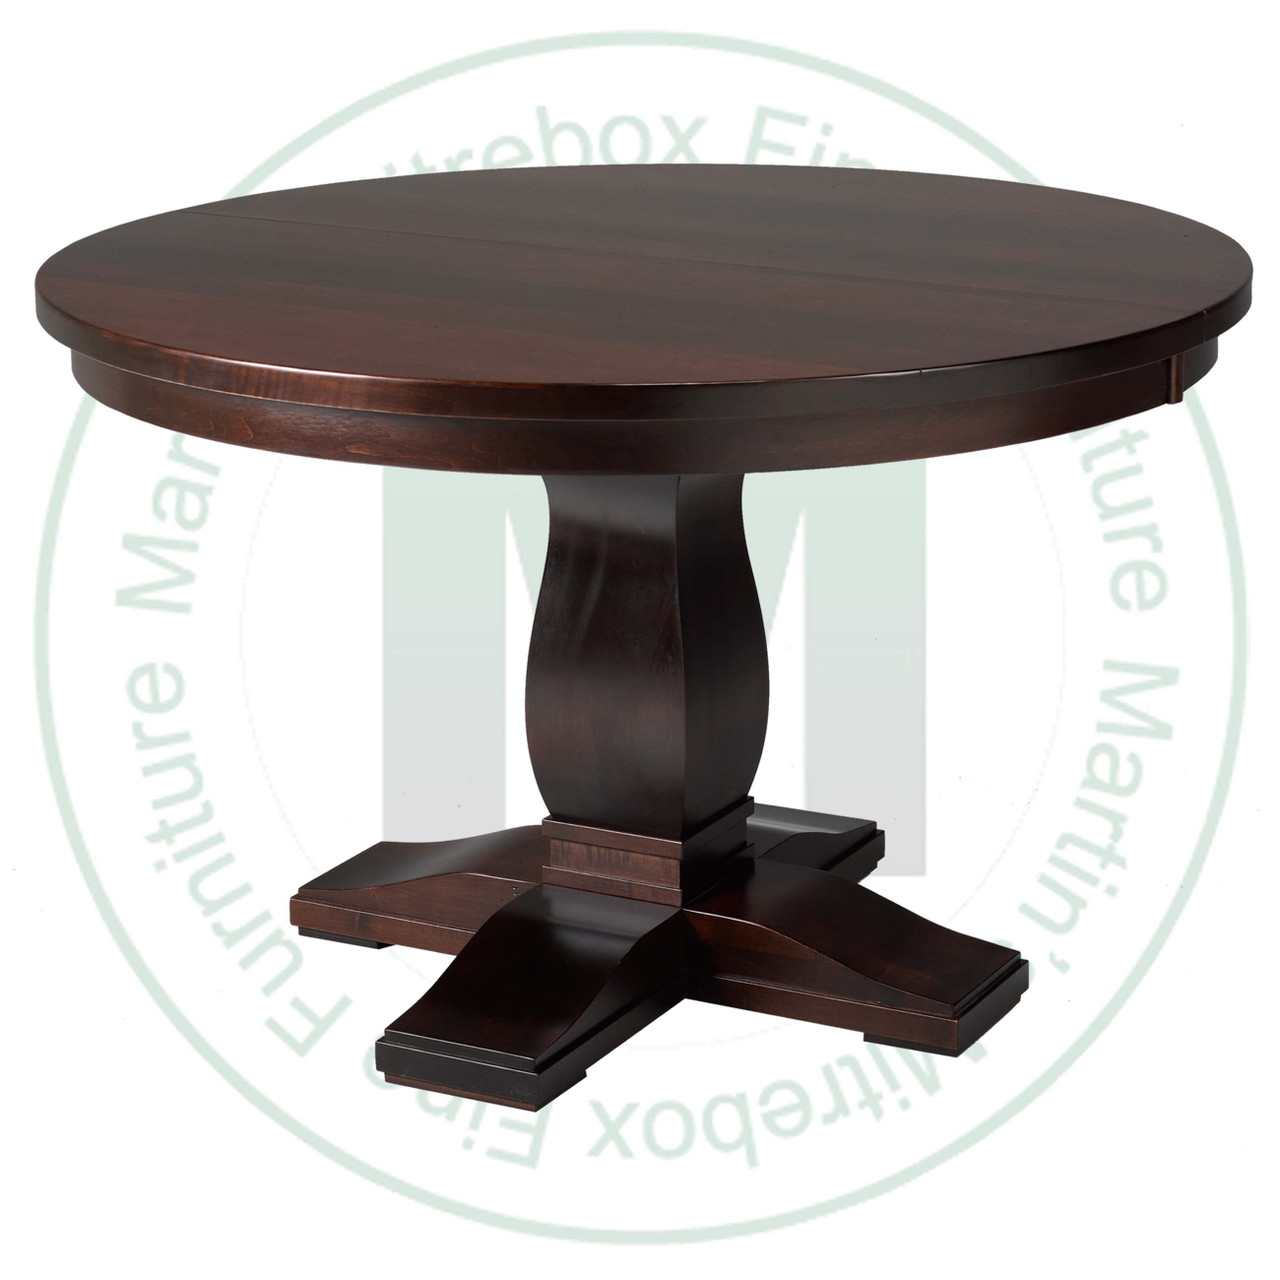 Oak Valencia Single Pedestal Table 42''D x 54''W x 30''H Round Solid Table. Table Has 1'' Thick Top.